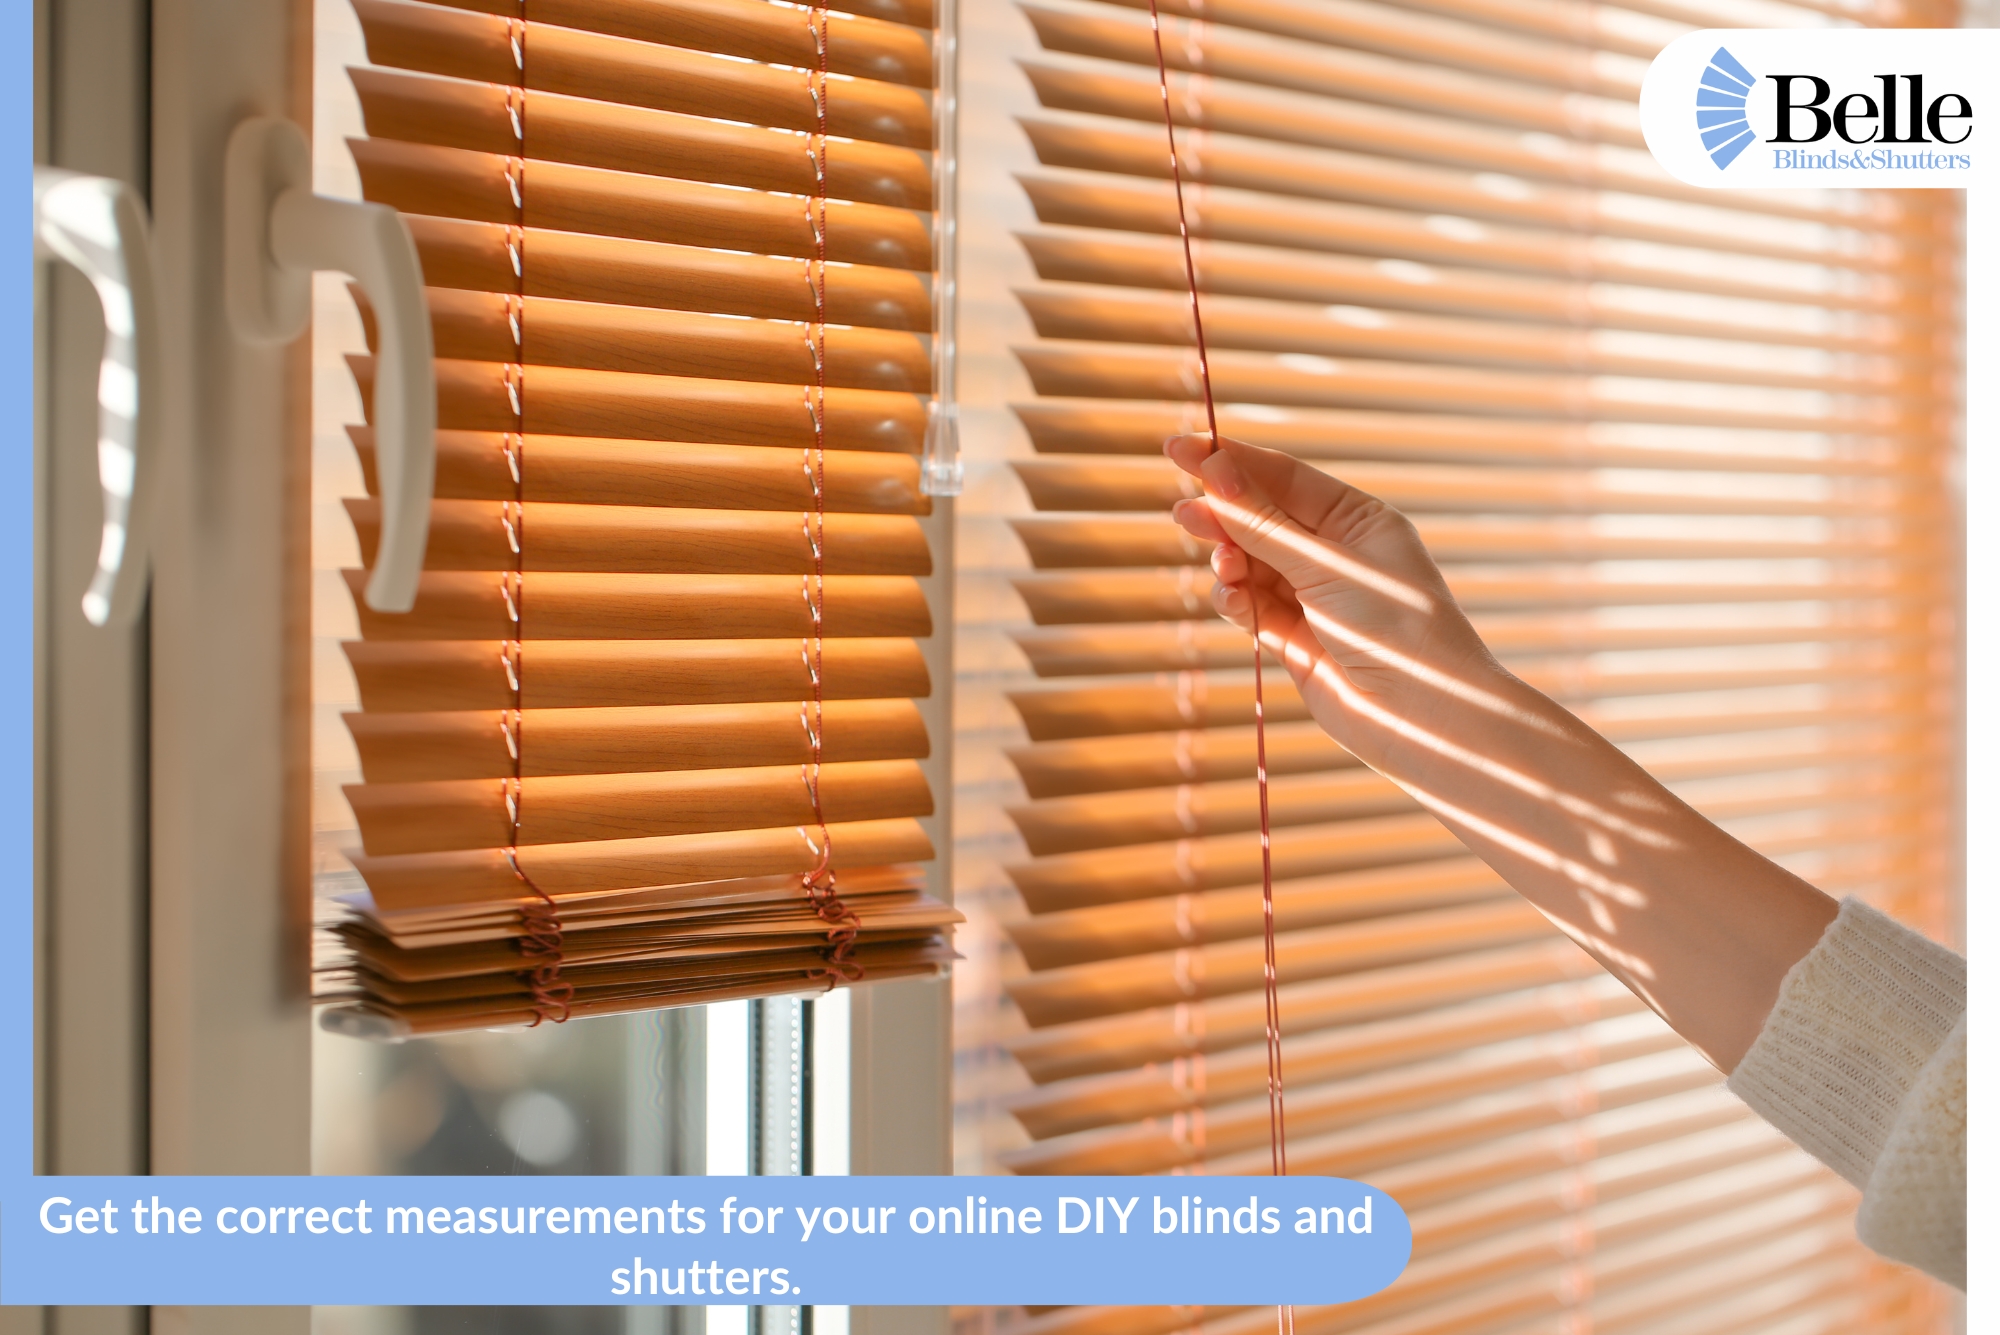 Get The Correct Measurements For Your Online Diy Blinds And Shutters